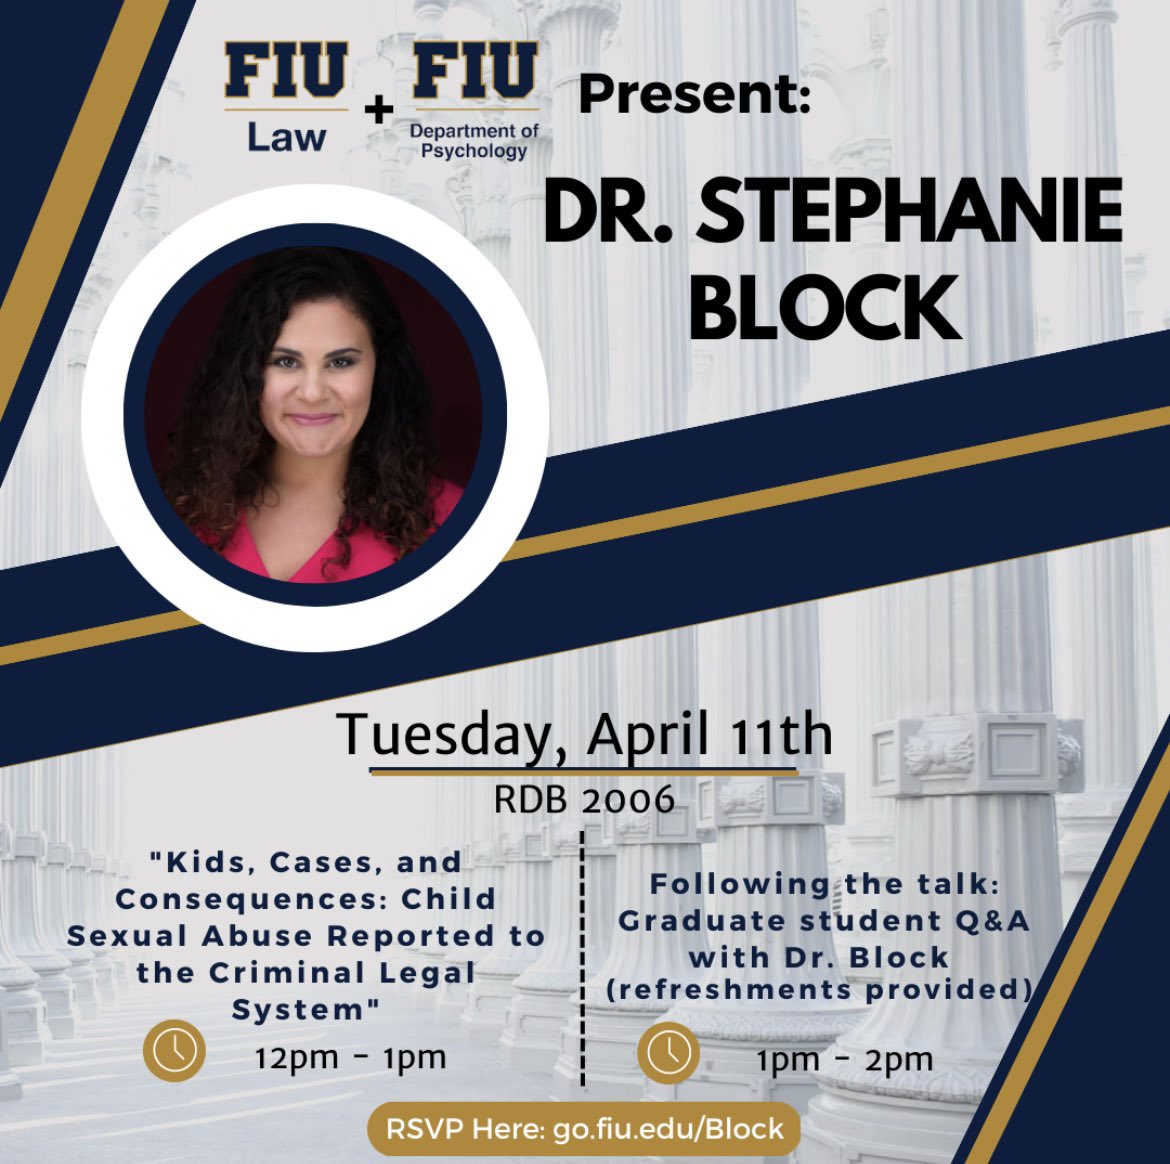 Looking forward to seeing colleagues at @fiupsych and @fiulaw next week!